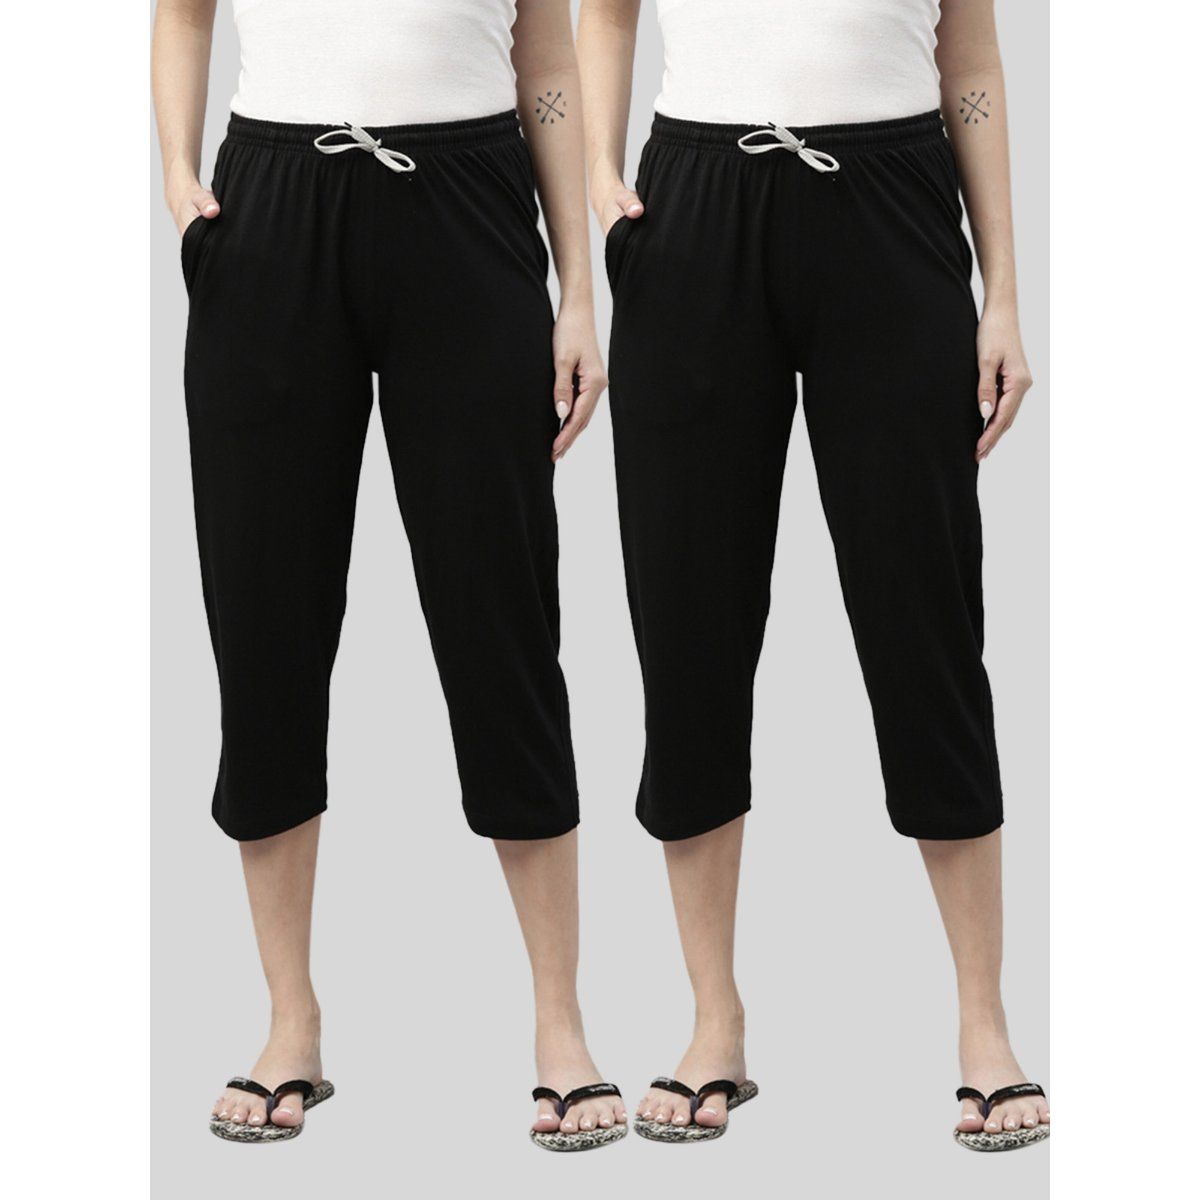 Cotton Black Capris For Women's, Design/Pattern: Solid at Rs 299/piece in  New Delhi